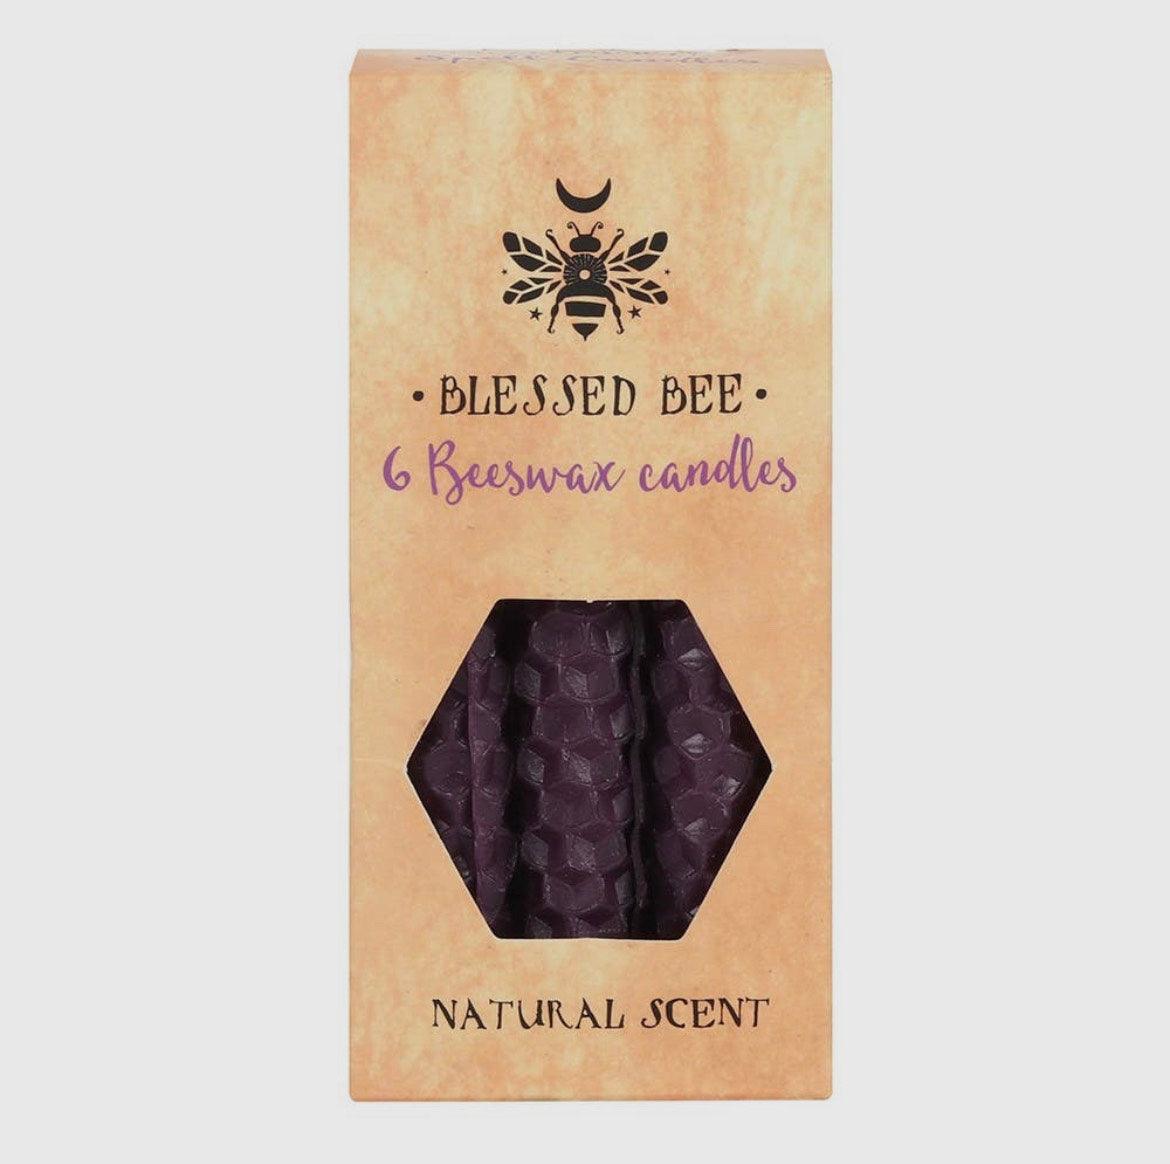 Set of 6 Purple Beeswax Magic Spell Candles